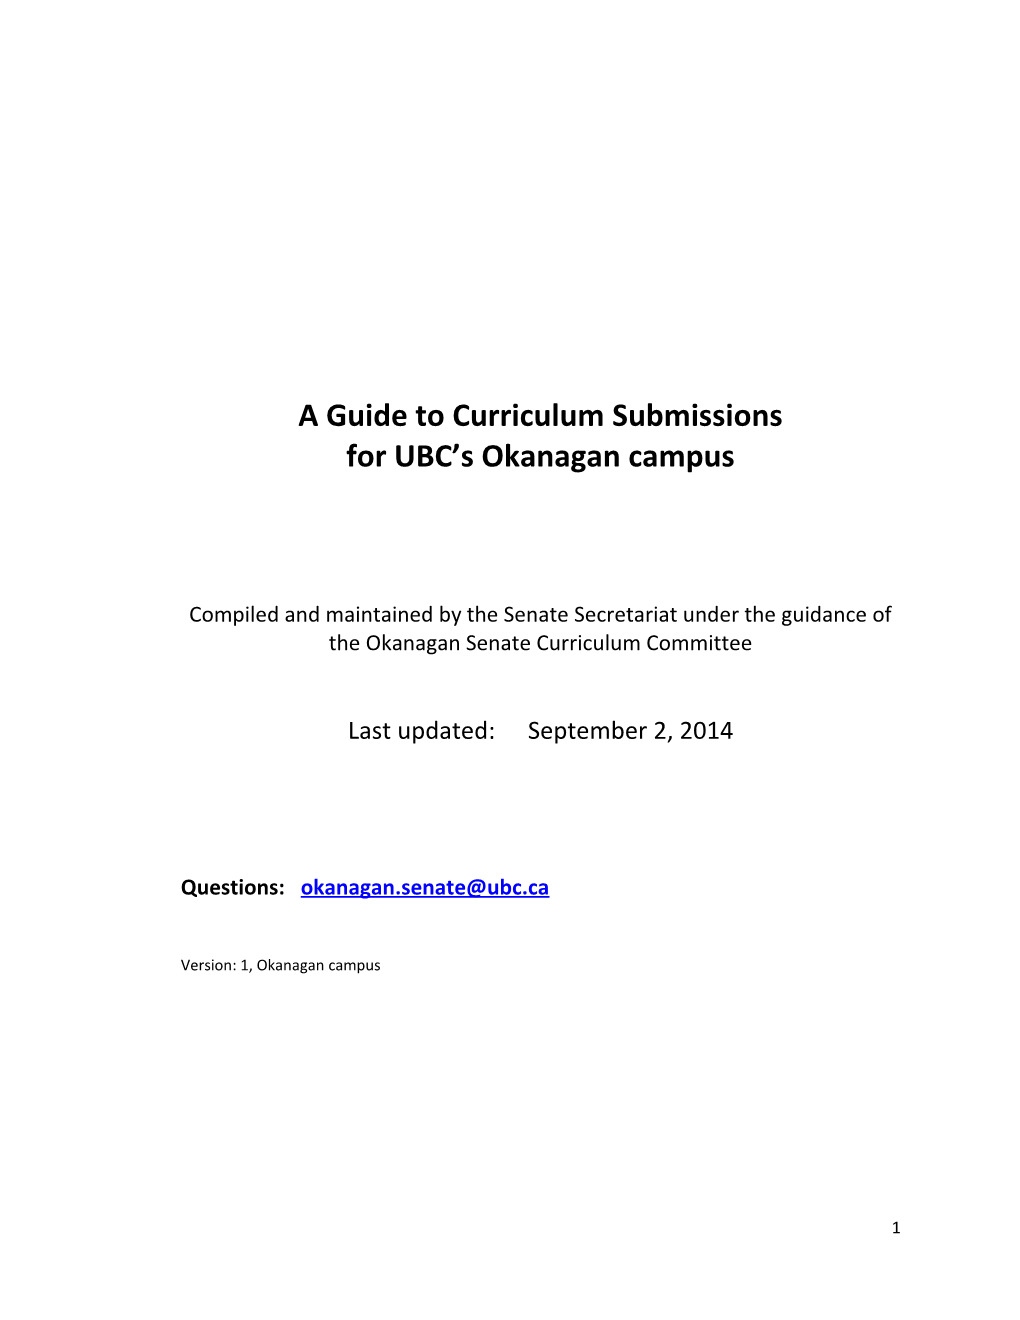 A Guide to Curriculum Submissions for UBC S Okanagan Campus